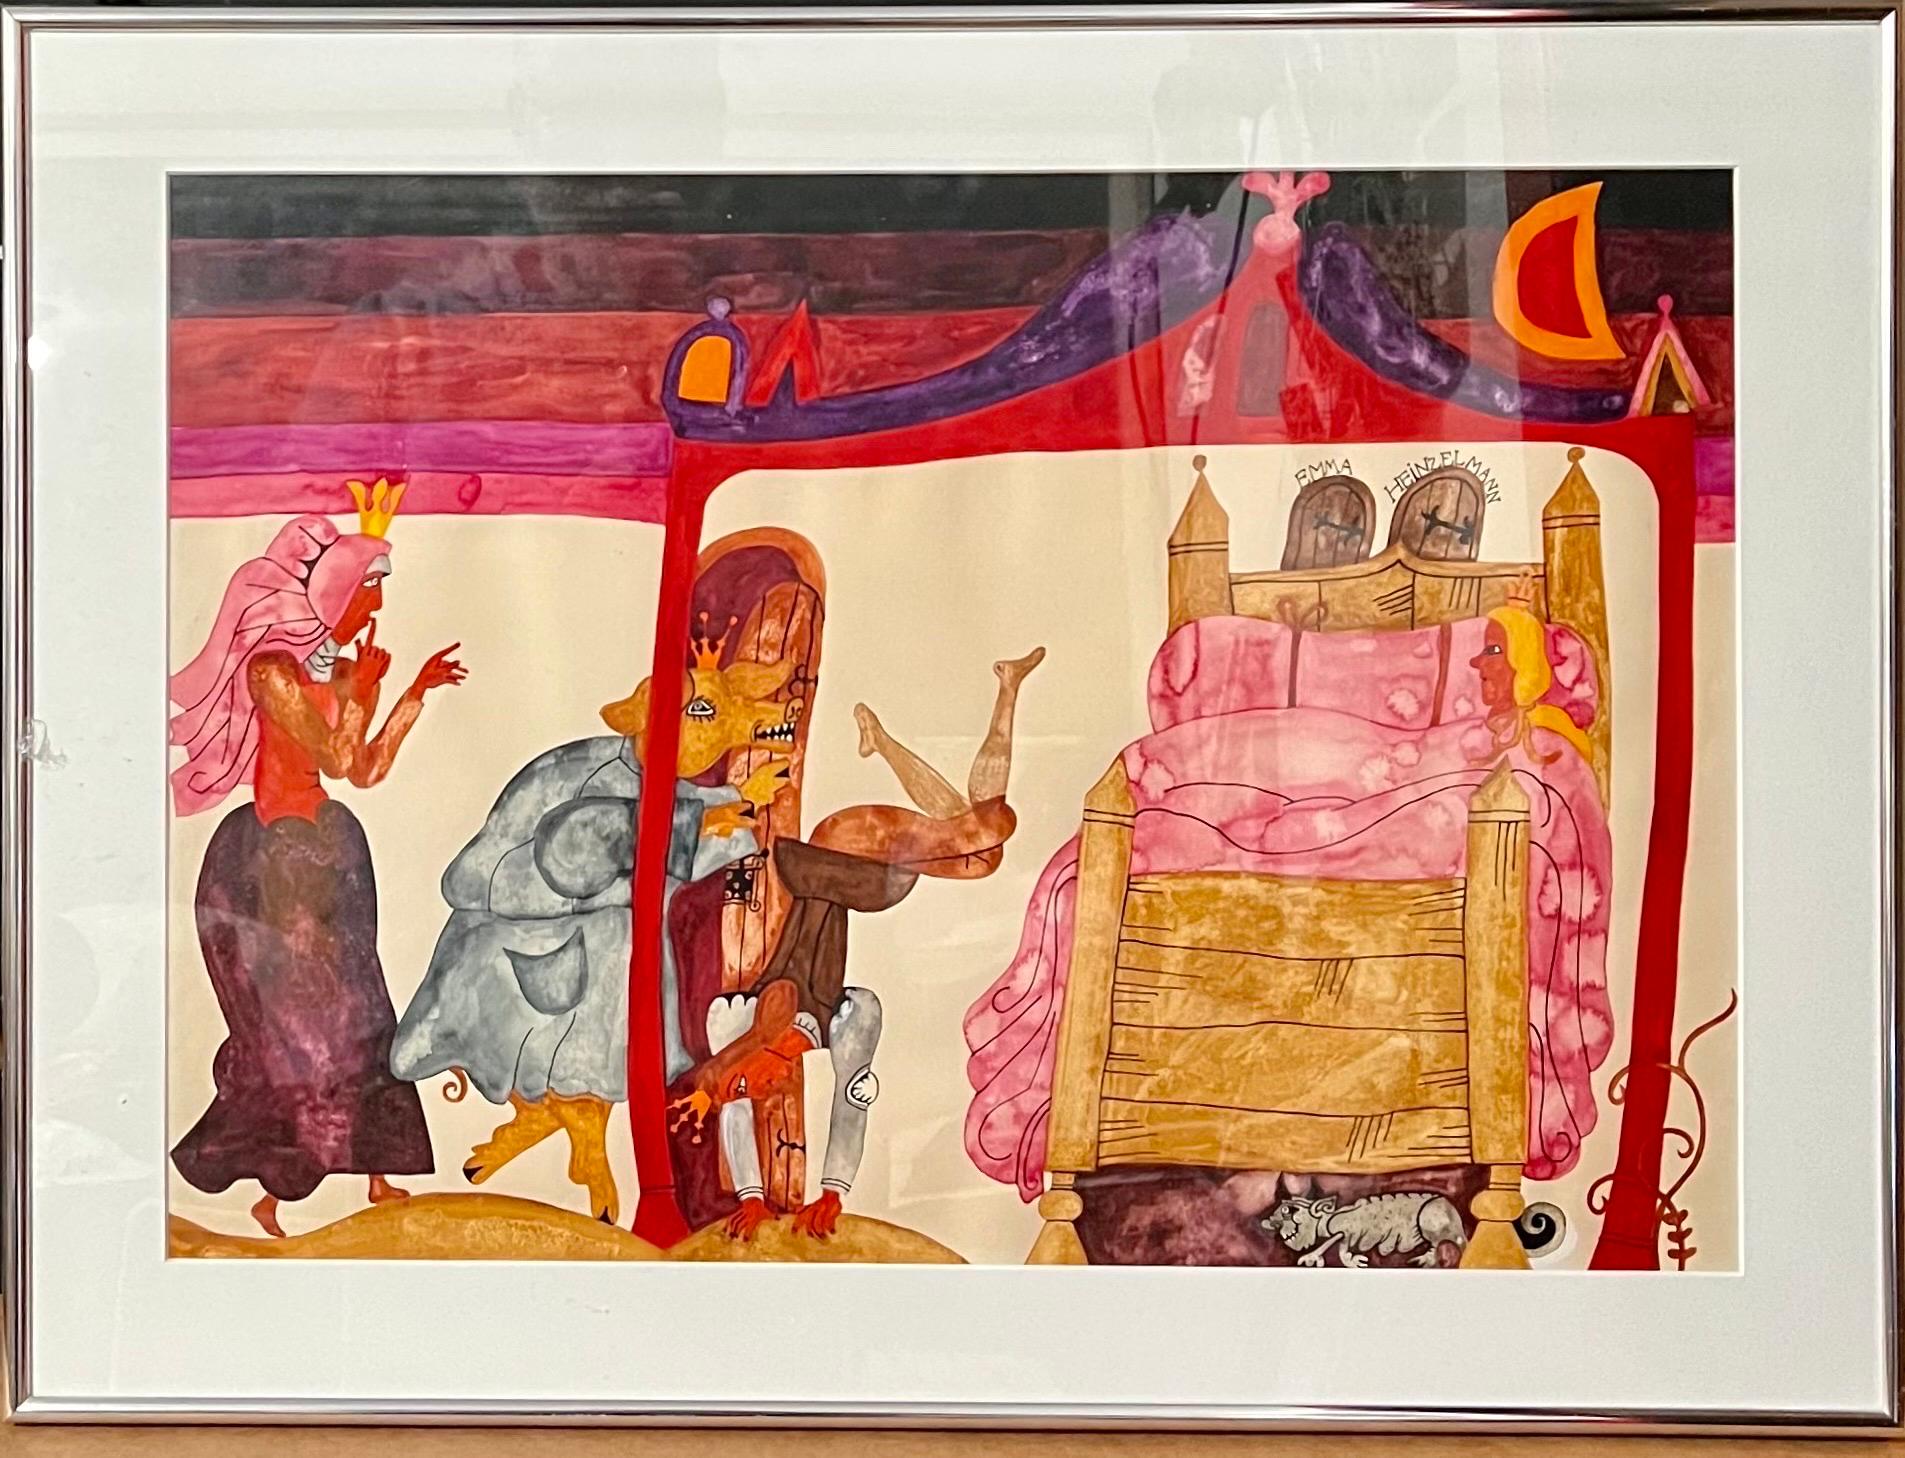 Original vintage gouache painting on poster board by Emma Heinzelmann (Hungarian, born 1930). Hungarian Peasant art, children fairytale themes, in psychedelic pop colors of the era.This painting that depicts figures including a crowned pig, and a